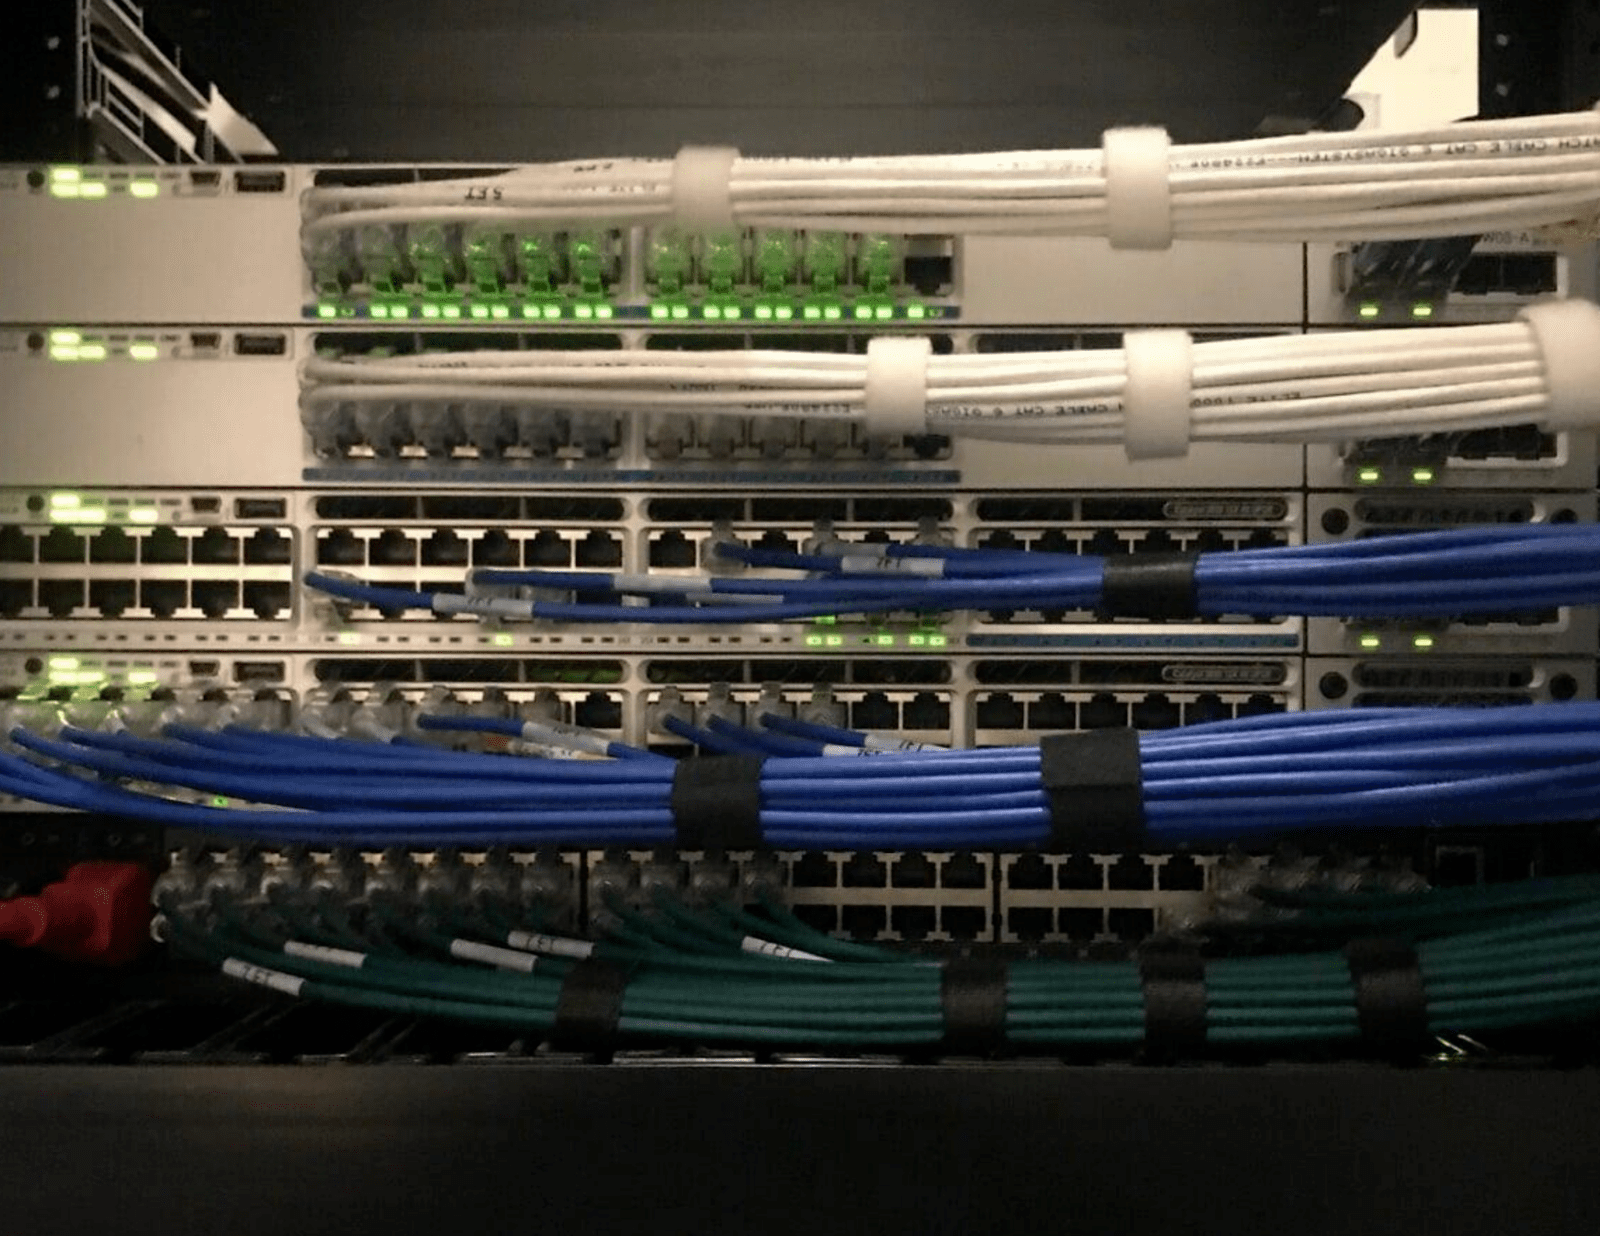 Infrastructure Cabling